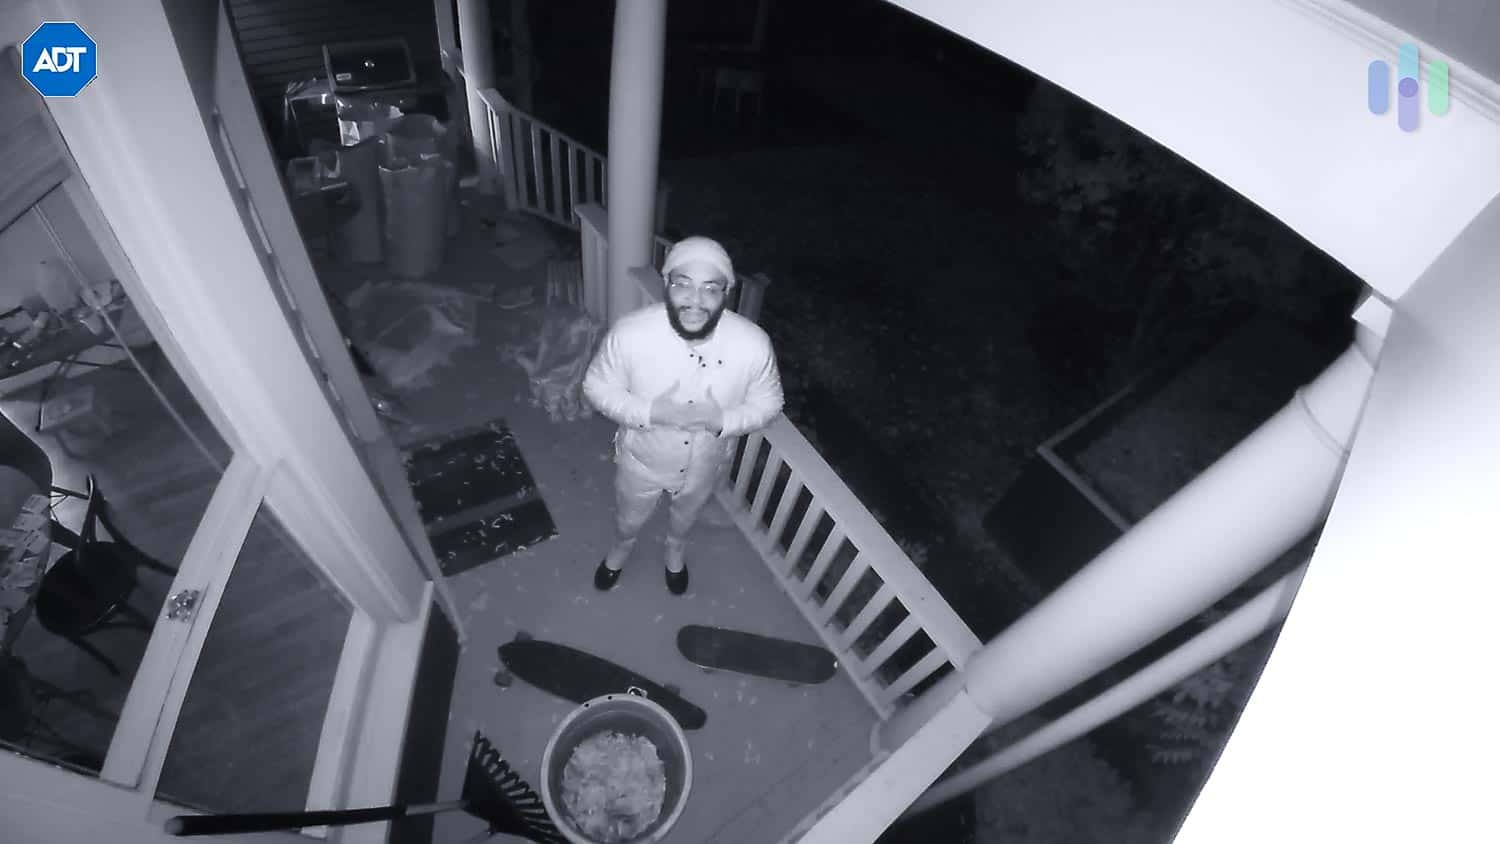 ADT Home Security - Camera Night Vision